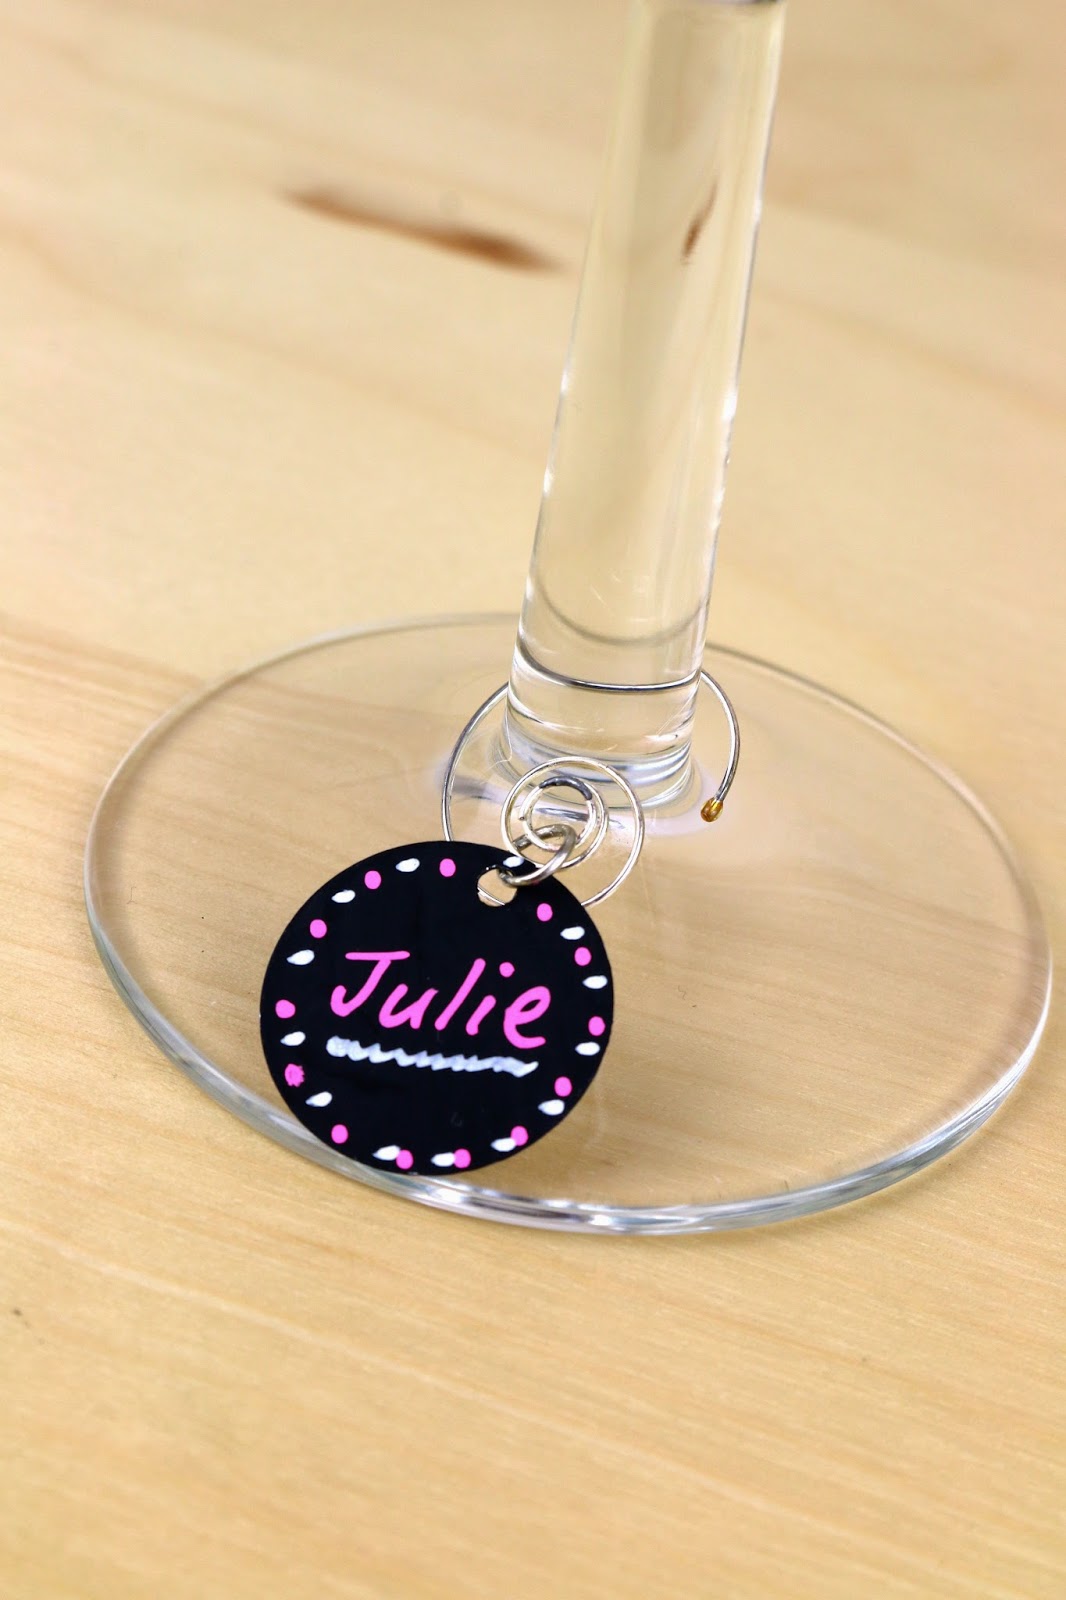 SRM Stickers Blog - Personalized Wine Glasses by Cathy A. - #easychalkboardmarker #chalkboard #markers #white #flourencent #personization #DIY